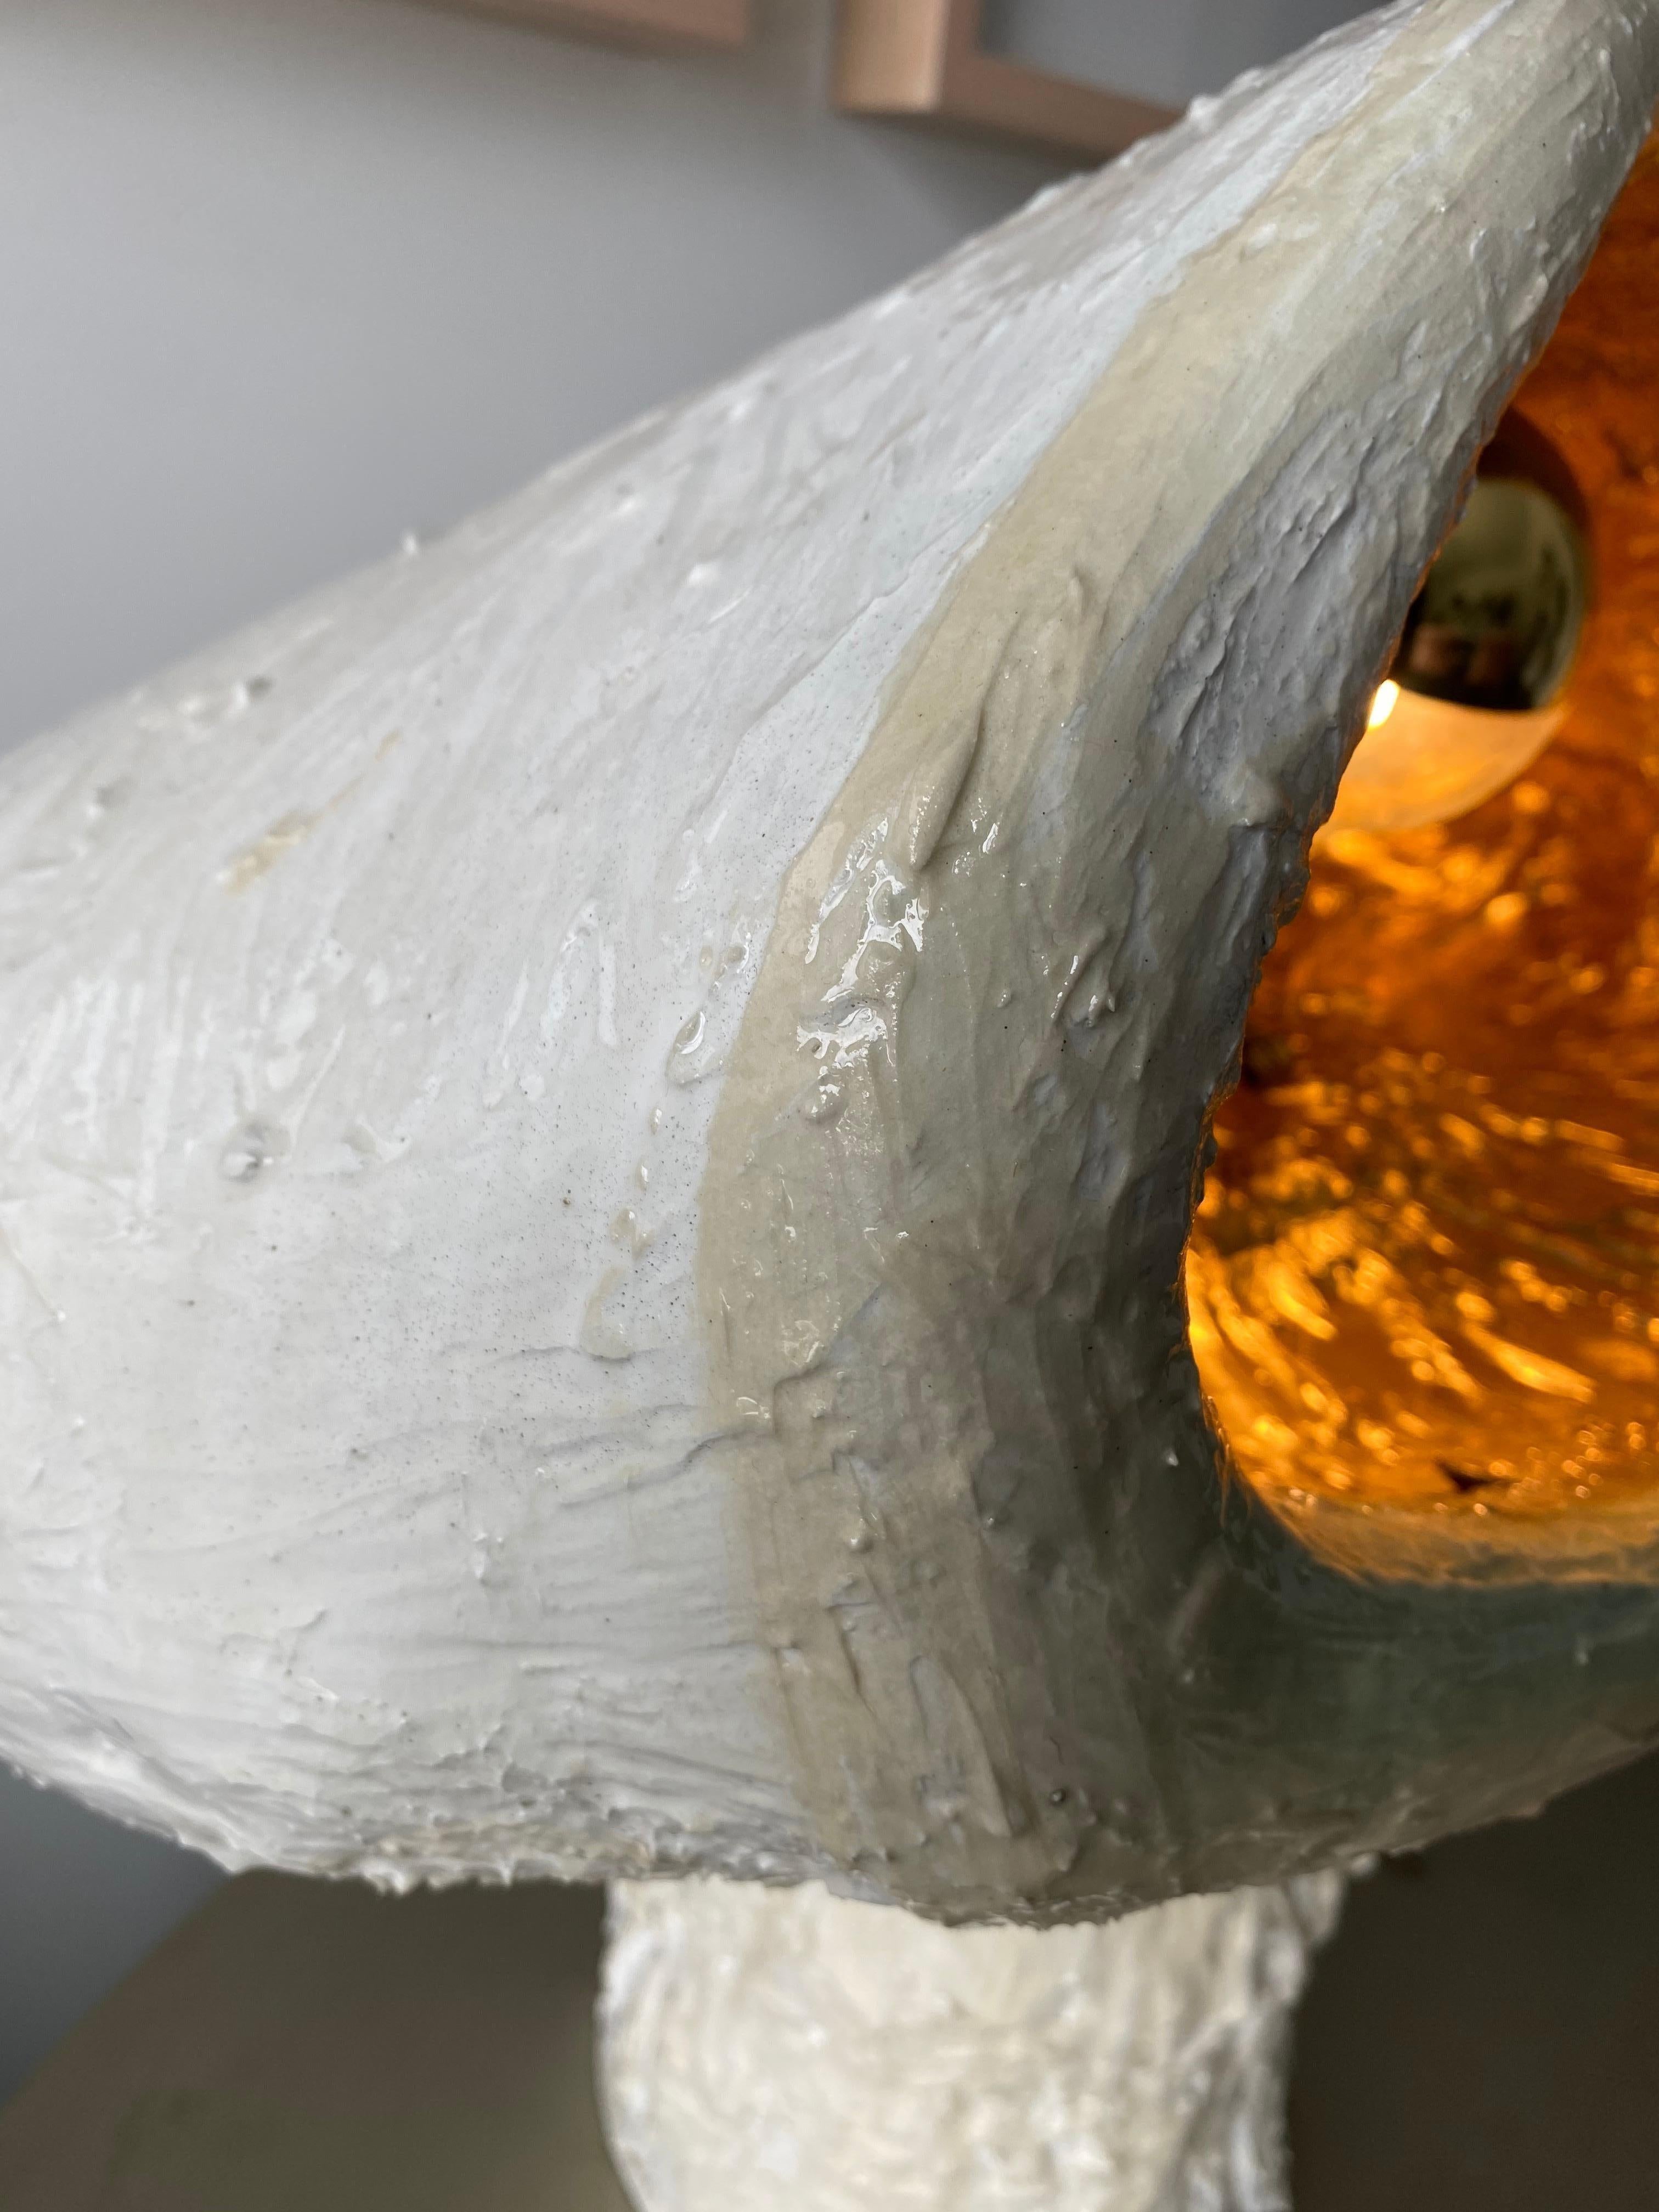 Hand-Crafted White Gold Sculptural Plaster Table Lamp, 21st Century by Mattia Biagi For Sale